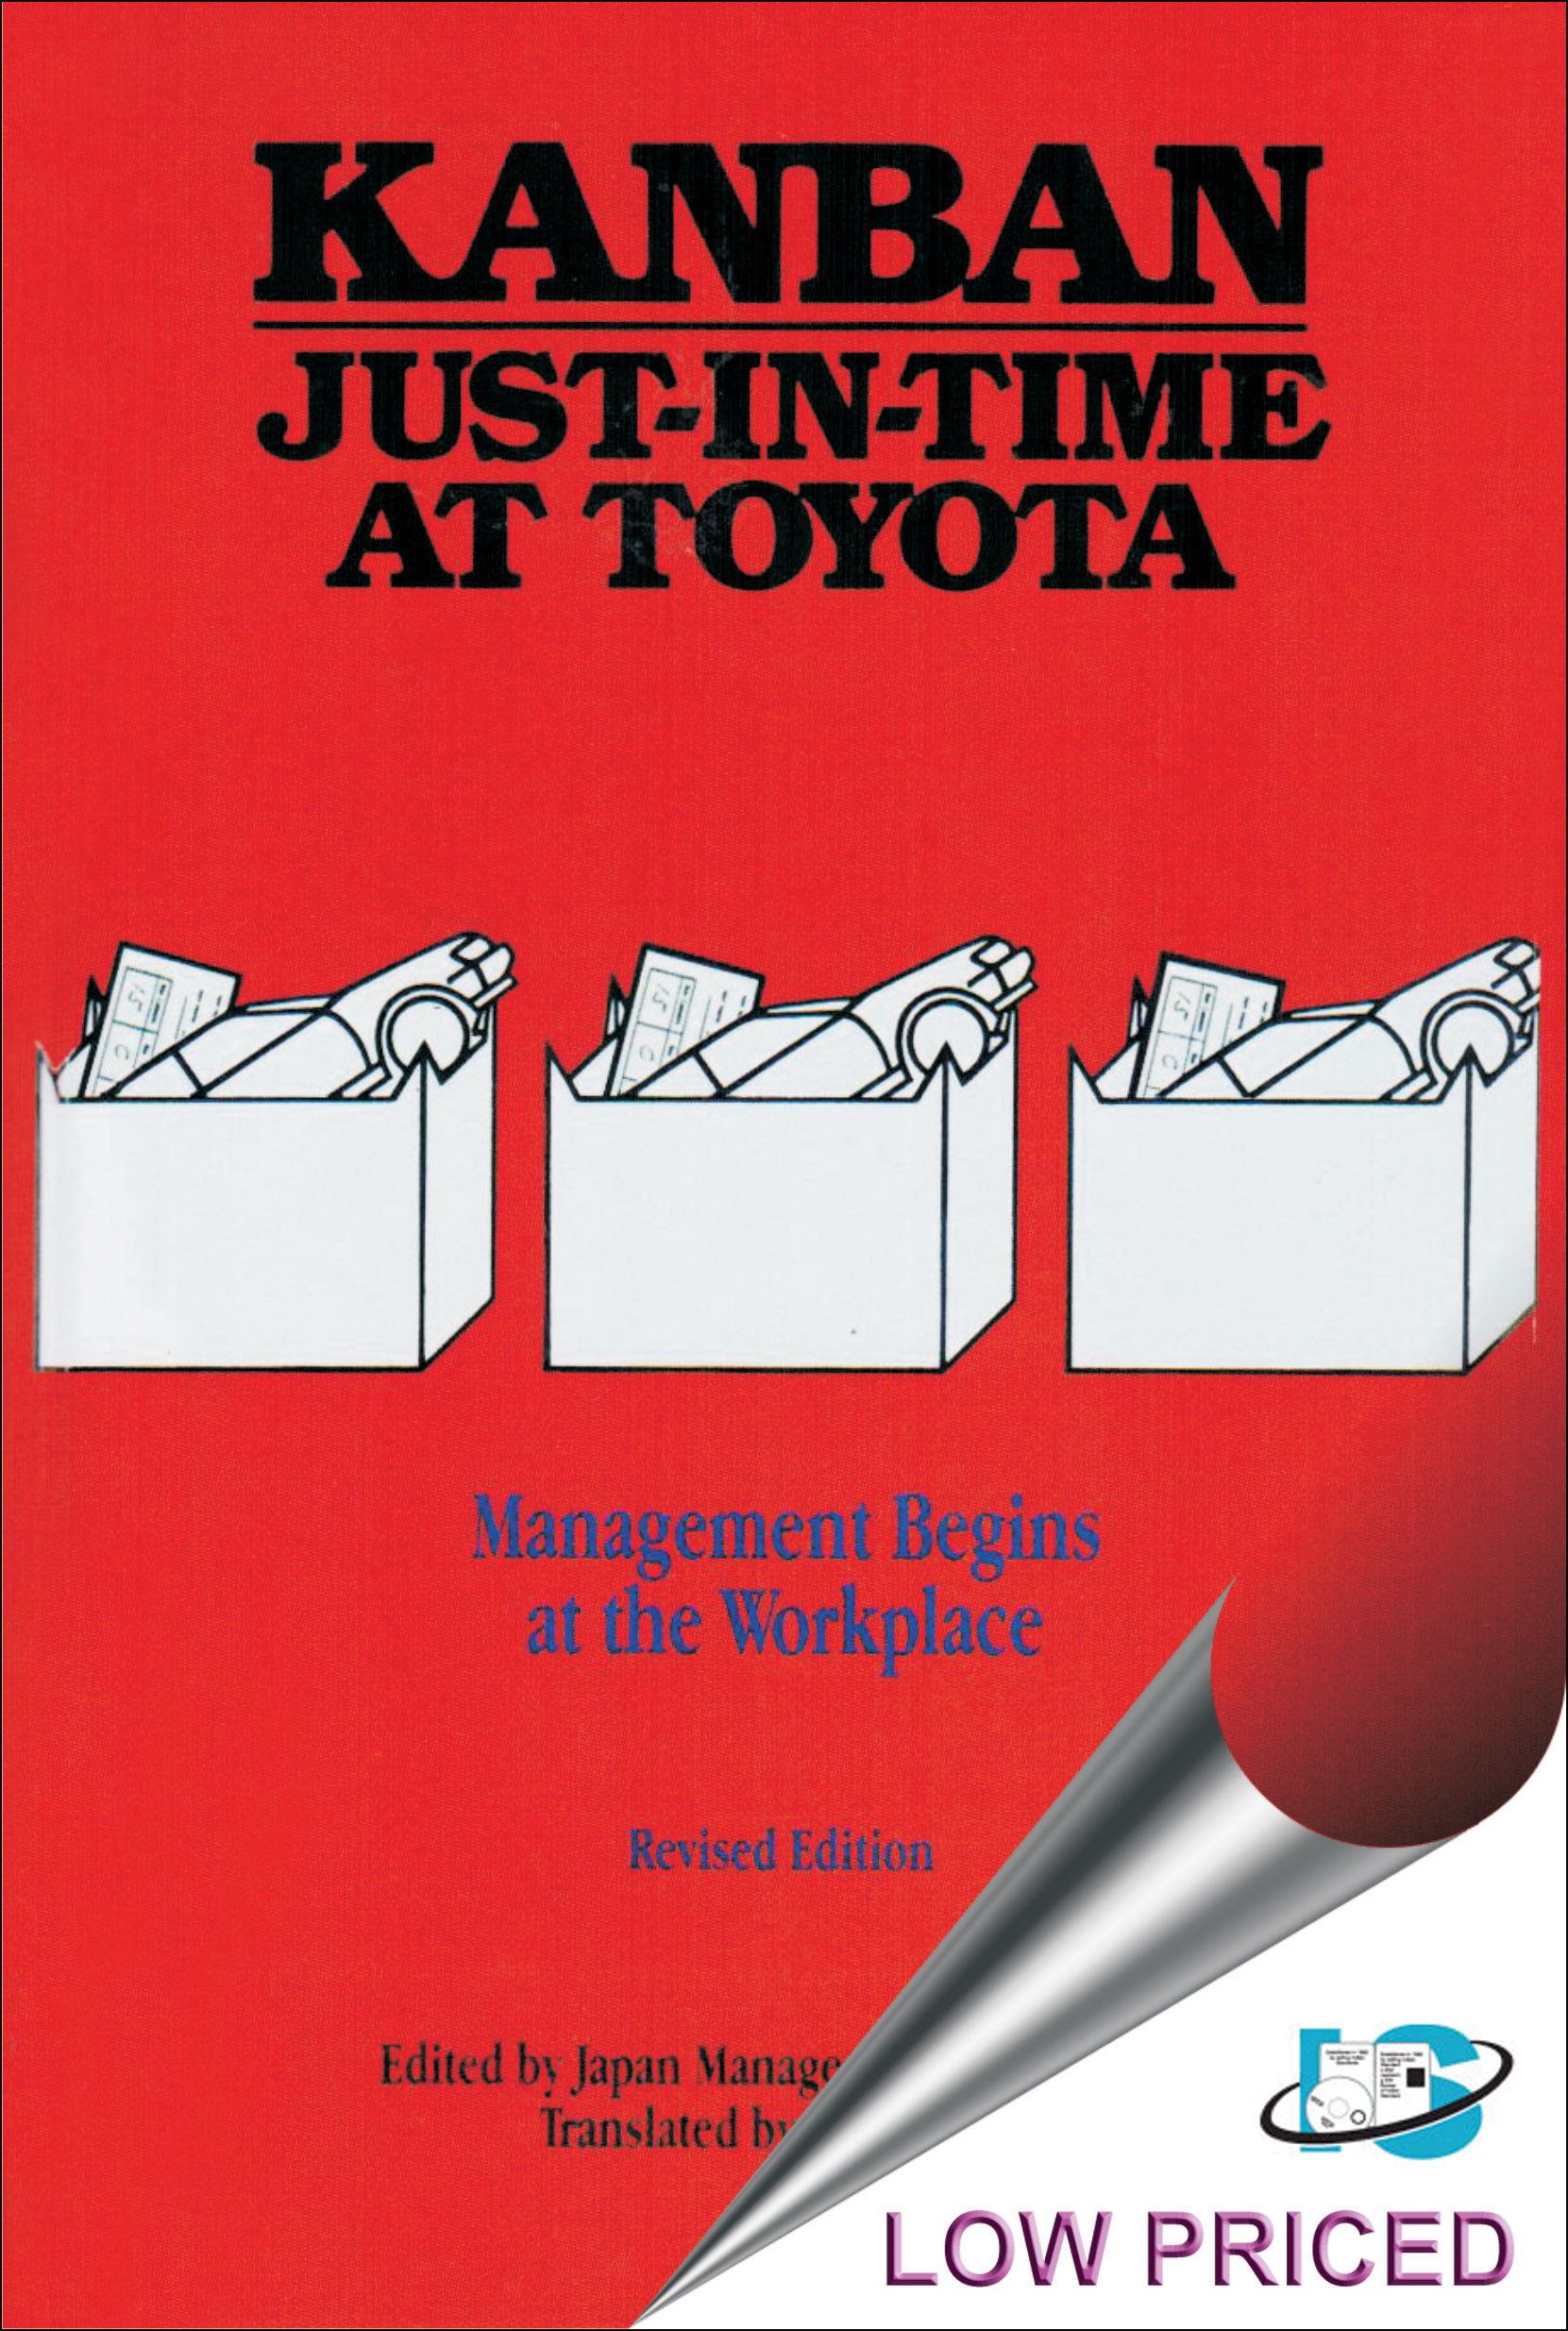 Just in time and toyota